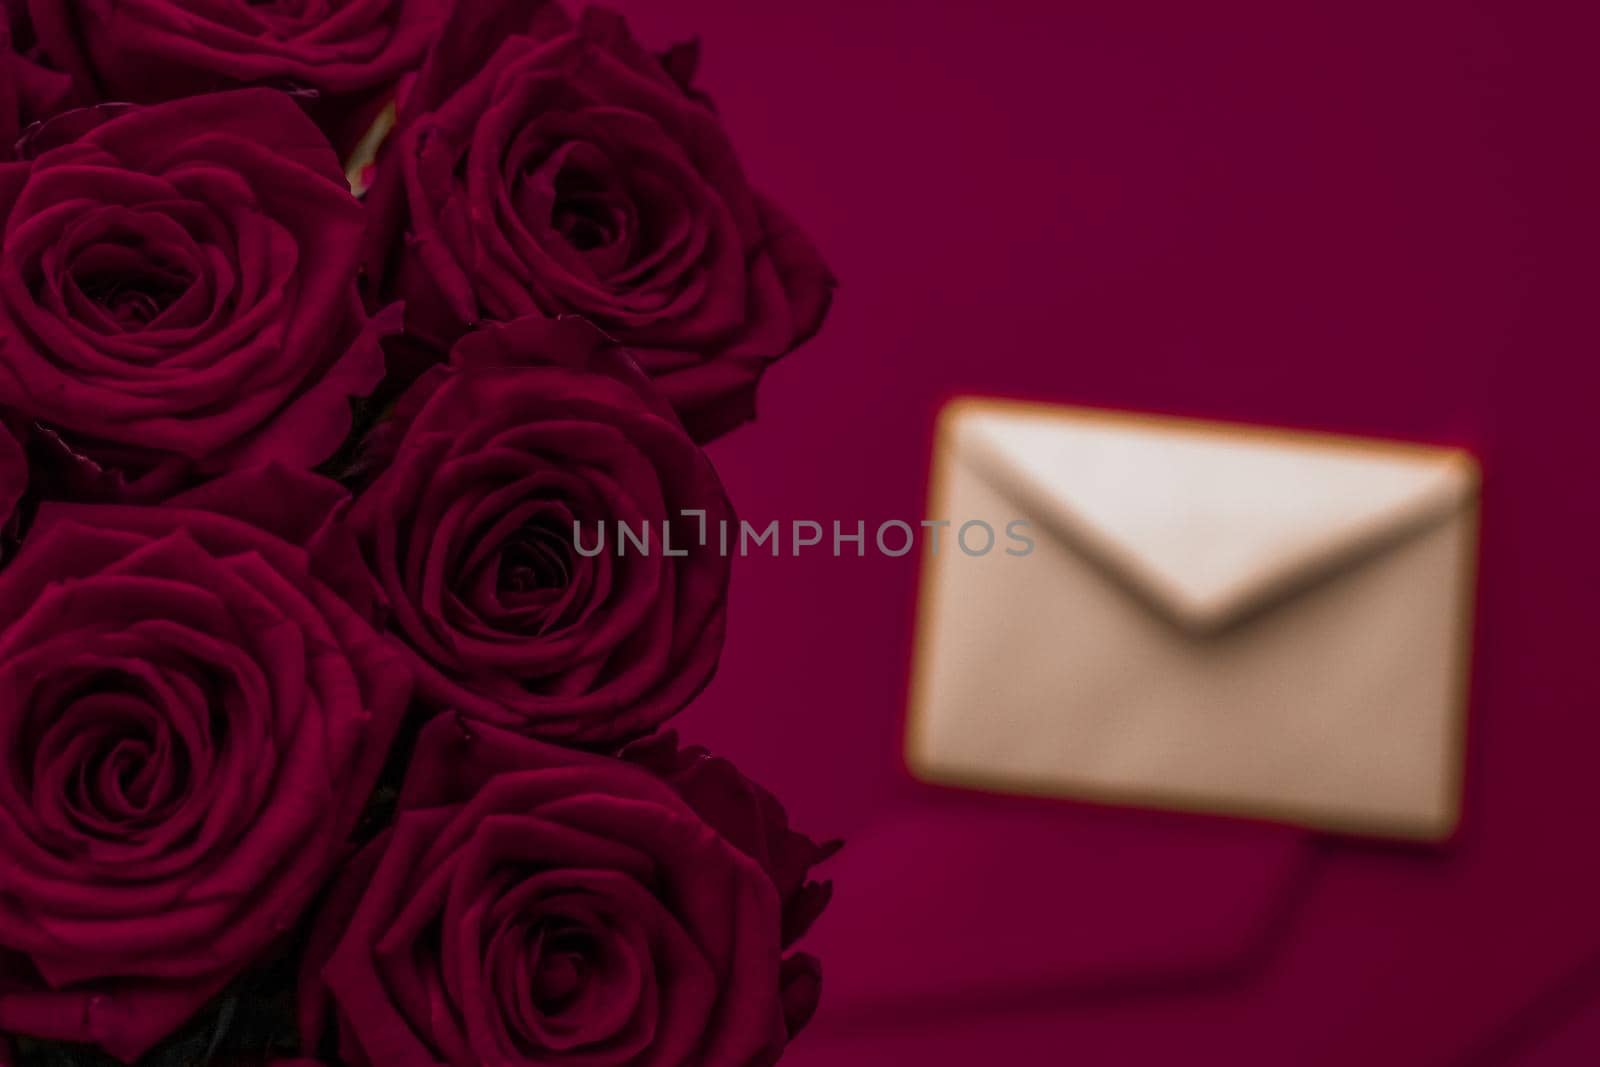 Love letter and flowers delivery on Valentines Day, luxury bouquet of roses and card on maroon background for romantic holiday design by Anneleven